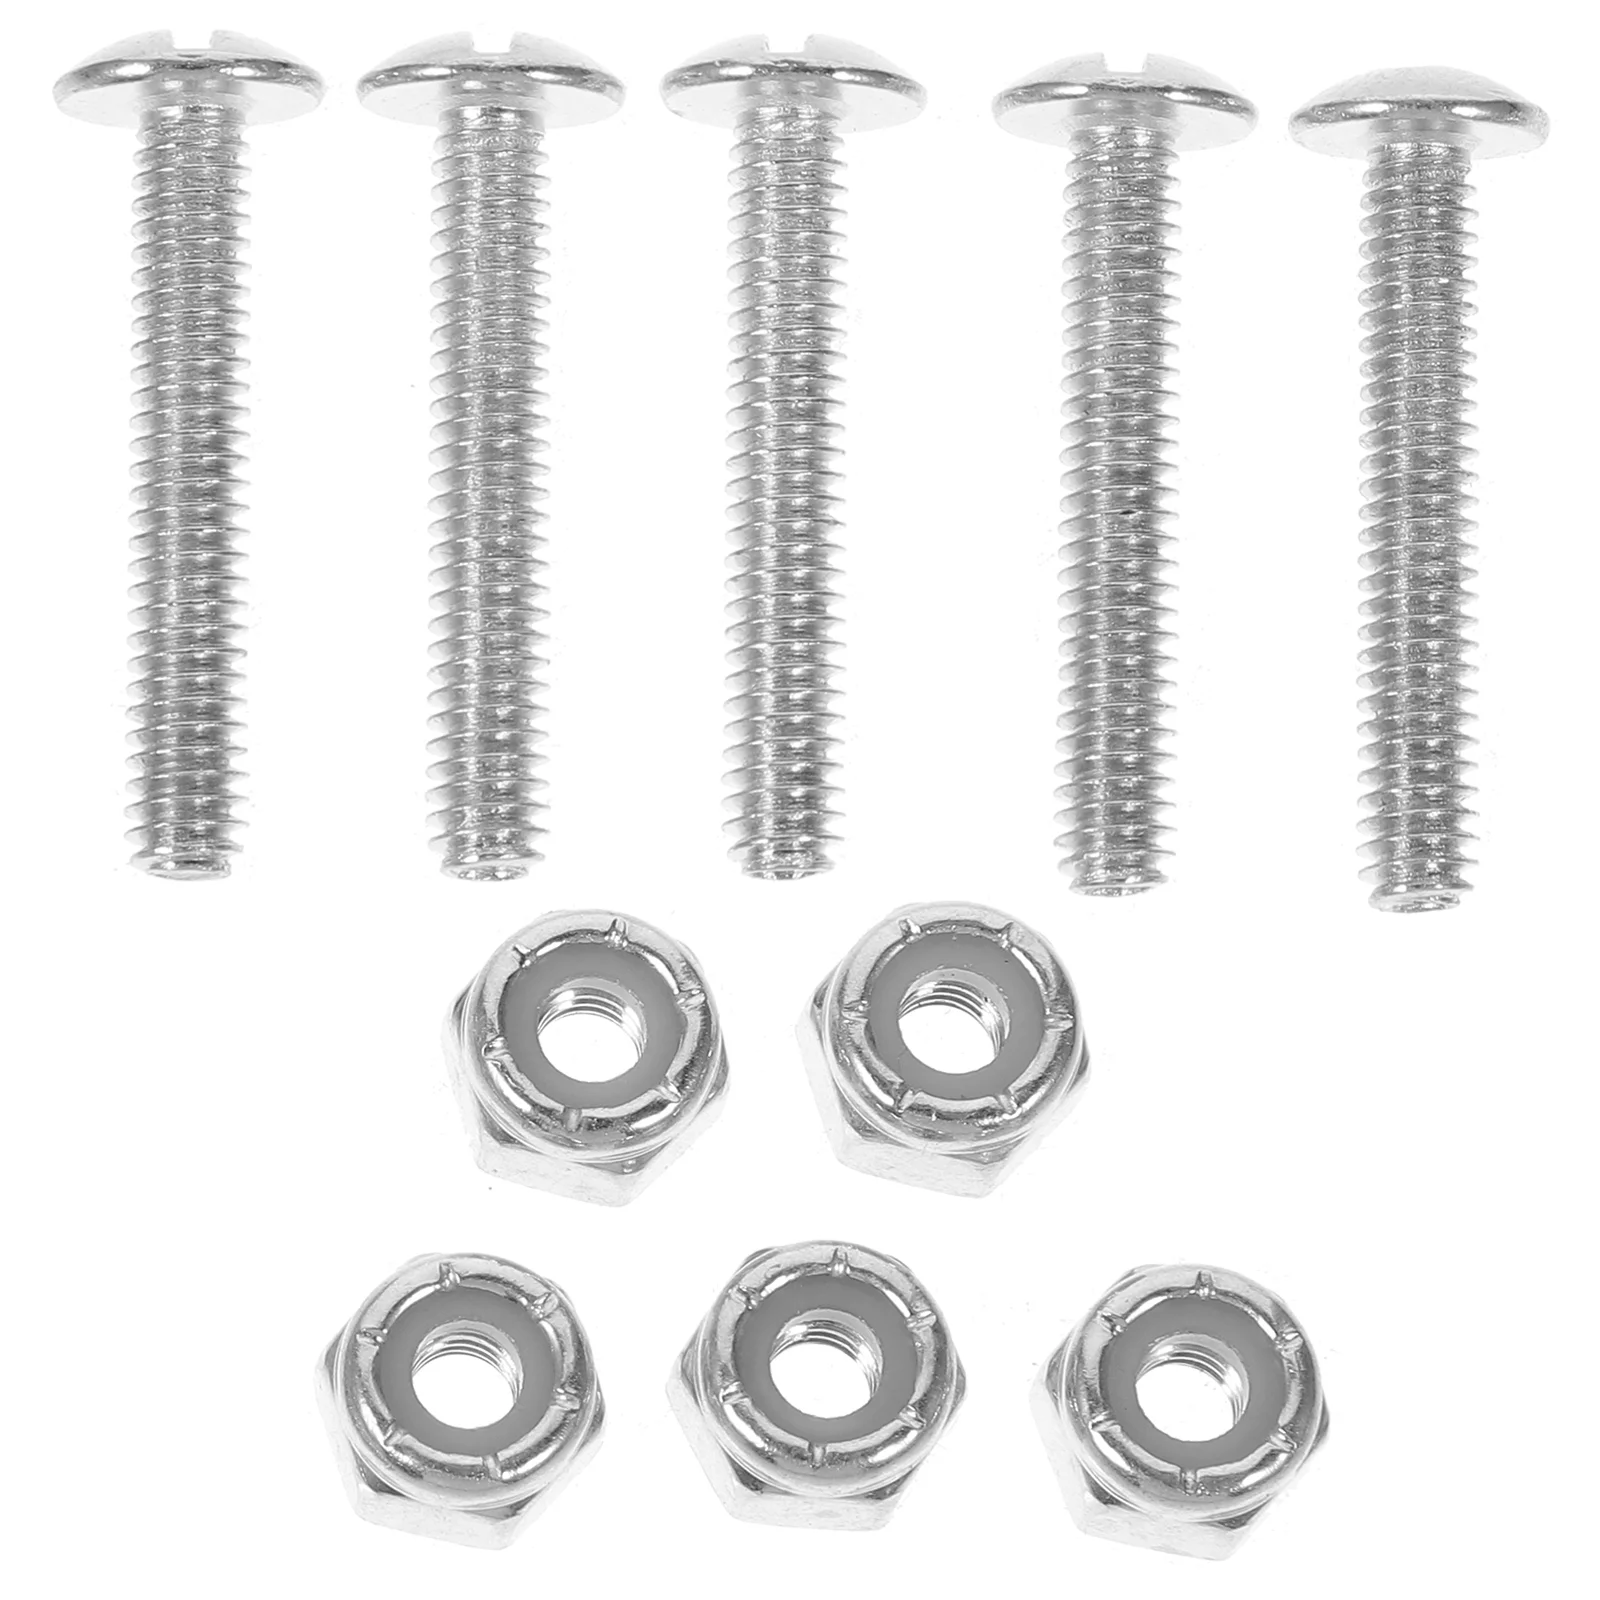 12 Pcs Table Football Screws Foosball Replacement Parts Nut Soccer Hardware Machine Nuts Galvanized Iron Accessories 3d printer diy project fasteners screws nuts full kit rident 3d printer screws full kit for voron trident parts